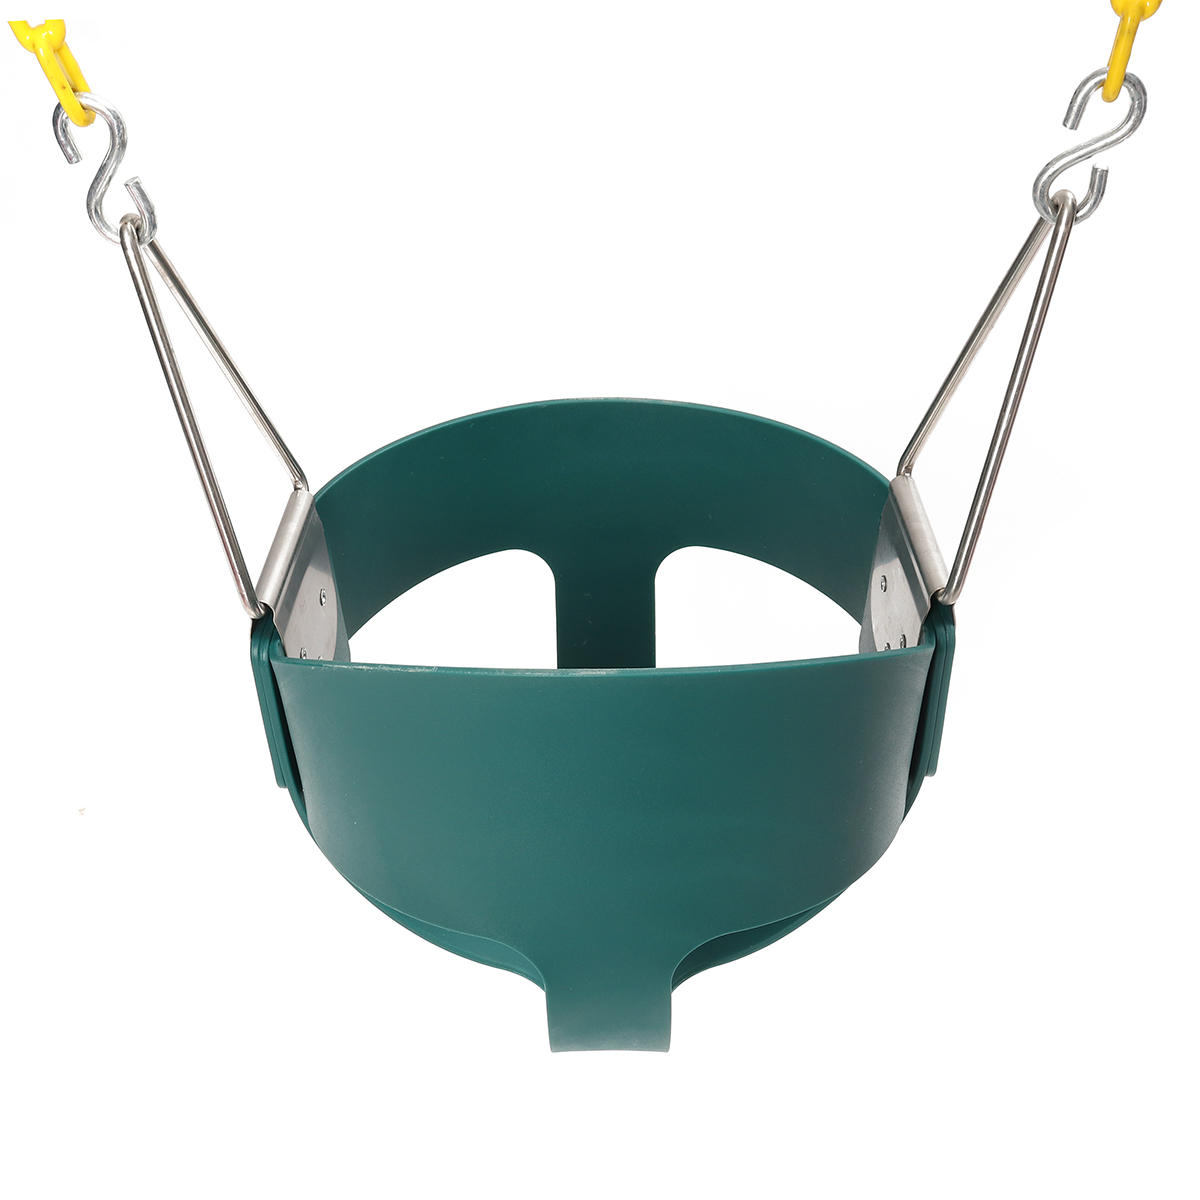 

Fully Assembled High Back Baby Swing Seat Full Bucket Toddler Playground Park Home Garden Cradle